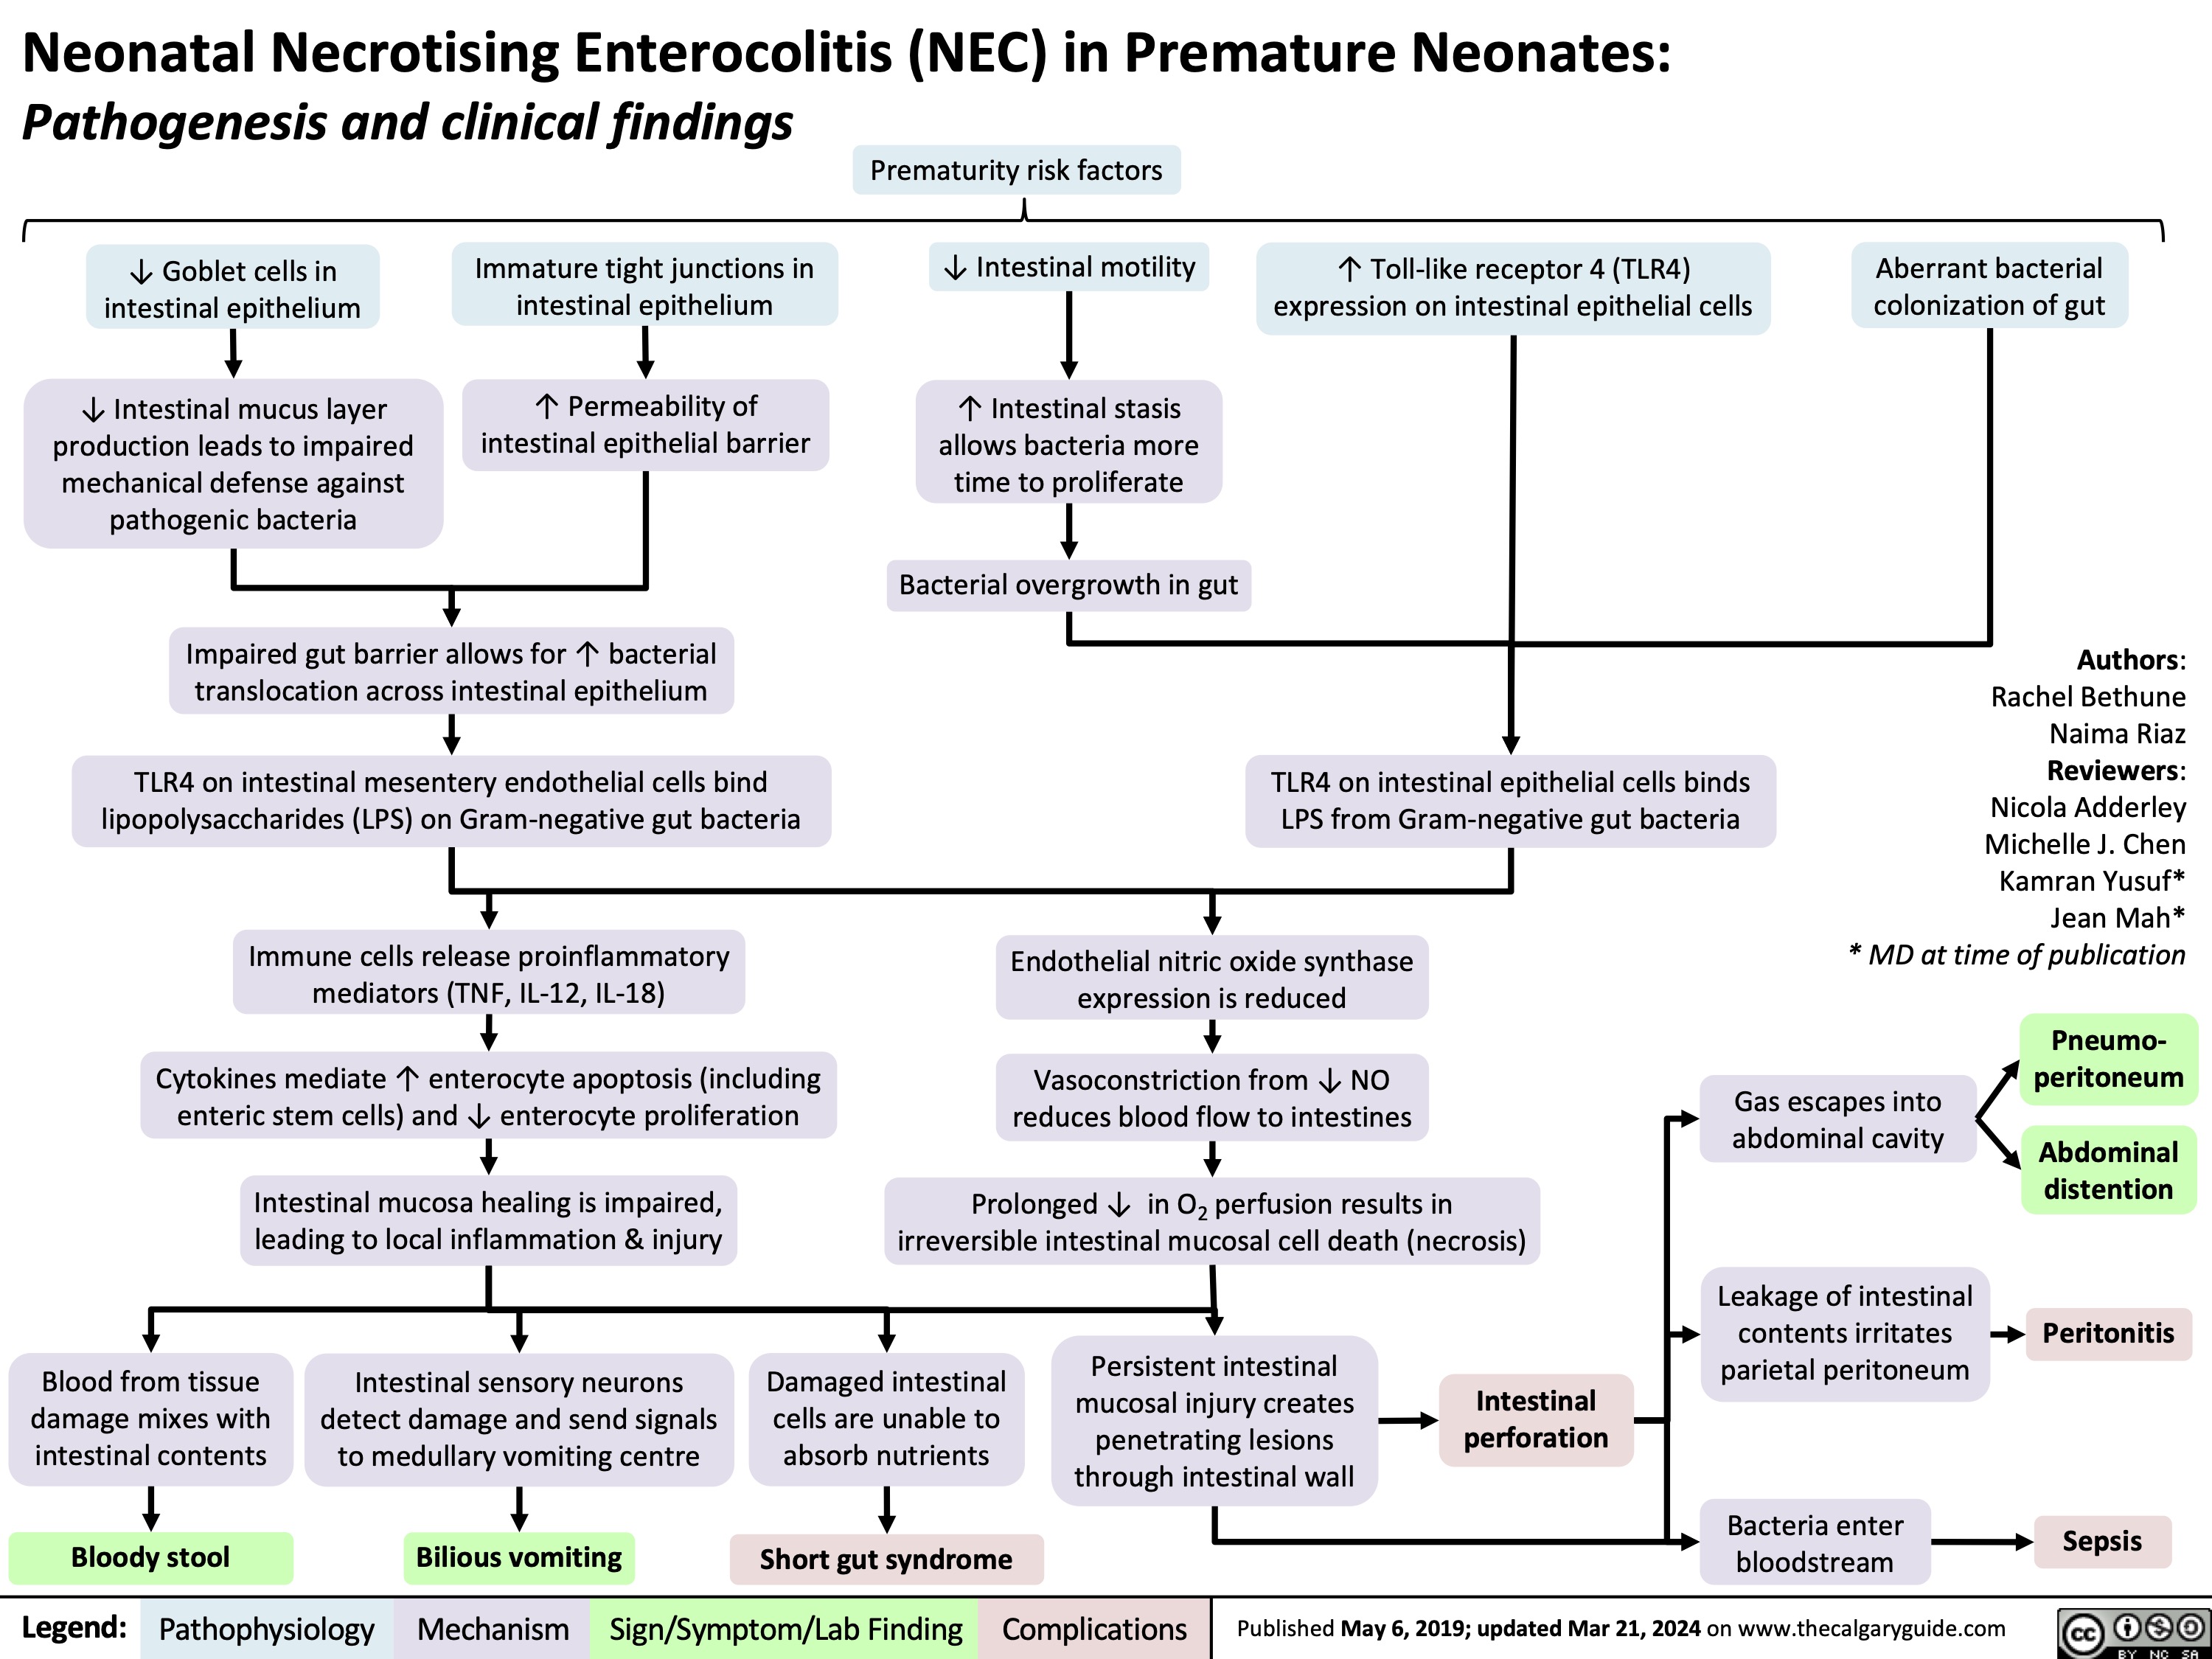 Neonatal Necrotising Enterocolitis (NEC) in Premature Neonates:
Pathogenesis and clinical findings
Prematurity risk factors ↓ Intestinal motility
↑ Intestinal stasis allows bacteria more time to proliferate
Bacterial overgrowth in gut
       ↓ Goblet cells in intestinal epithelium
↓ Intestinal mucus layer production leads to impaired mechanical defense against pathogenic bacteria
Immature tight junctions in intestinal epithelium
↑ Permeability of intestinal epithelial barrier
↑ Toll-like receptor 4 (TLR4) expression on intestinal epithelial cells
Aberrant bacterial colonization of gut
          Impaired gut barrier allows for ↑ bacterial translocation across intestinal epithelium
TLR4 on intestinal mesentery endothelial cells bind lipopolysaccharides (LPS) on Gram-negative gut bacteria
Immune cells release proinflammatory mediators (TNF, IL-12, IL-18)
Cytokines mediate ↑ enterocyte apoptosis (including enteric stem cells) and ↓ enterocyte proliferation
Intestinal mucosa healing is impaired, leading to local inflammation & injury
TLR4 on intestinal epithelial cells binds LPS from Gram-negative gut bacteria
Authors: Rachel Bethune Naima Riaz Reviewers: Nicola Adderley Michelle J. Chen Kamran Yusuf* Jean Mah* * MD at time of publication
      Endothelial nitric oxide synthase expression is reduced
Vasoconstriction from ↓ NO reduces blood flow to intestines
Prolonged ↓ in O2 perfusion results in irreversible intestinal mucosal cell death (necrosis)
Gas escapes into abdominal cavity
Leakage of intestinal contents irritates parietal peritoneum
Bacteria enter bloodstream
Pneumo- peritoneum
Abdominal distention
Peritonitis
Sepsis
                 Blood from tissue damage mixes with intestinal contents
Bloody stool
Intestinal sensory neurons detect damage and send signals to medullary vomiting centre
Bilious vomiting
Damaged intestinal cells are unable to absorb nutrients
Short gut syndrome
Persistent intestinal mucosal injury creates penetrating lesions through intestinal wall
Intestinal perforation
         Legend:
 Pathophysiology
 Mechanism
Sign/Symptom/Lab Finding
 Complications
 Published May 6, 2019; updated Mar 21, 2024 on www.thecalgaryguide.com
  